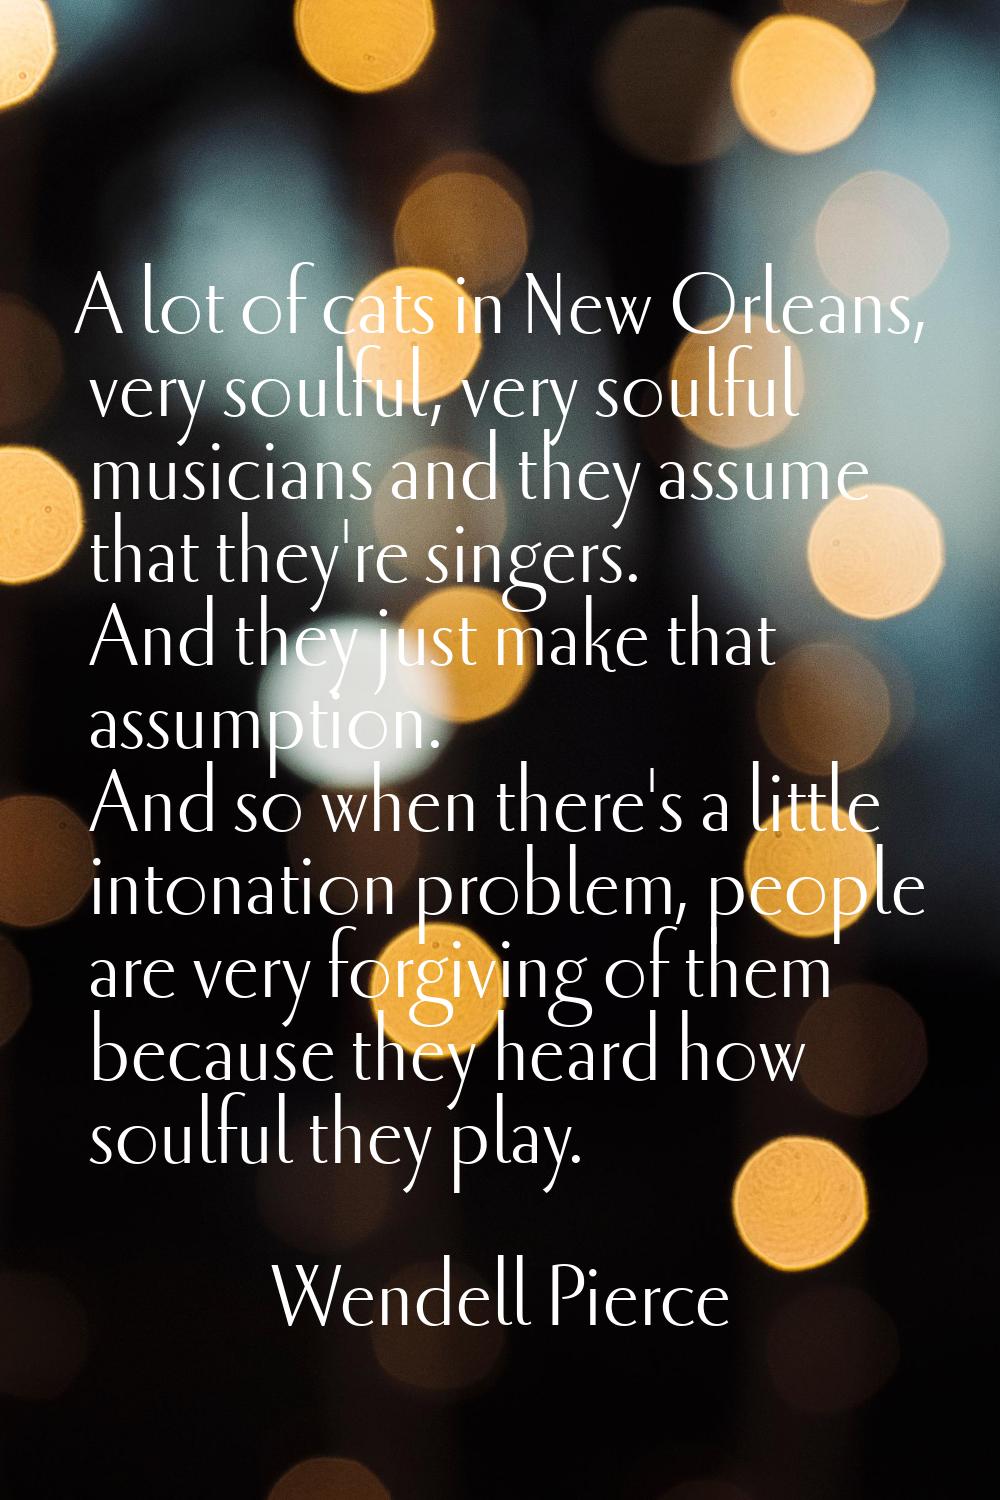 A lot of cats in New Orleans, very soulful, very soulful musicians and they assume that they're sin